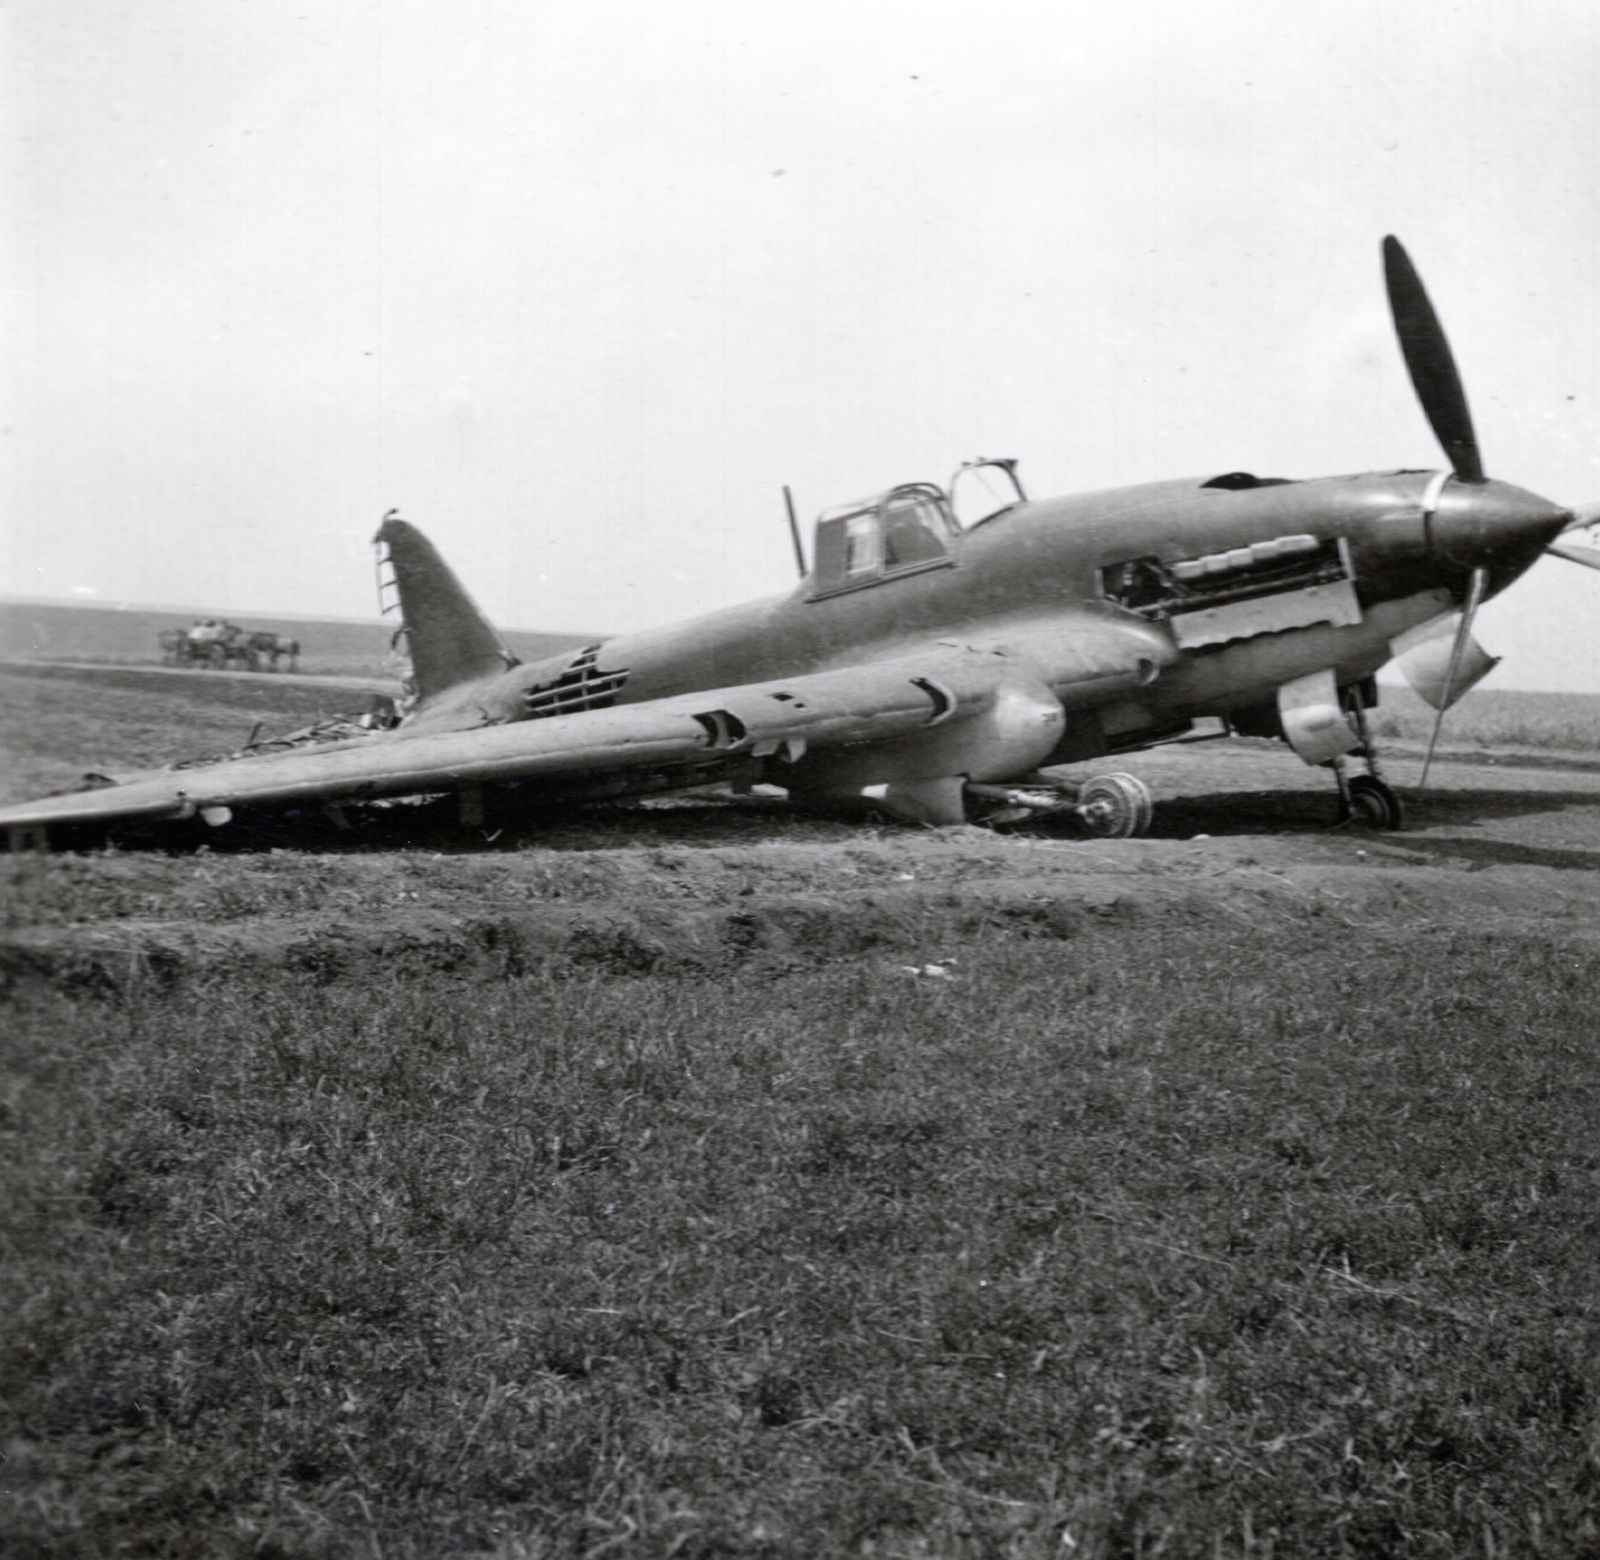 An abandoned Il-2 single seater,  1941-1942